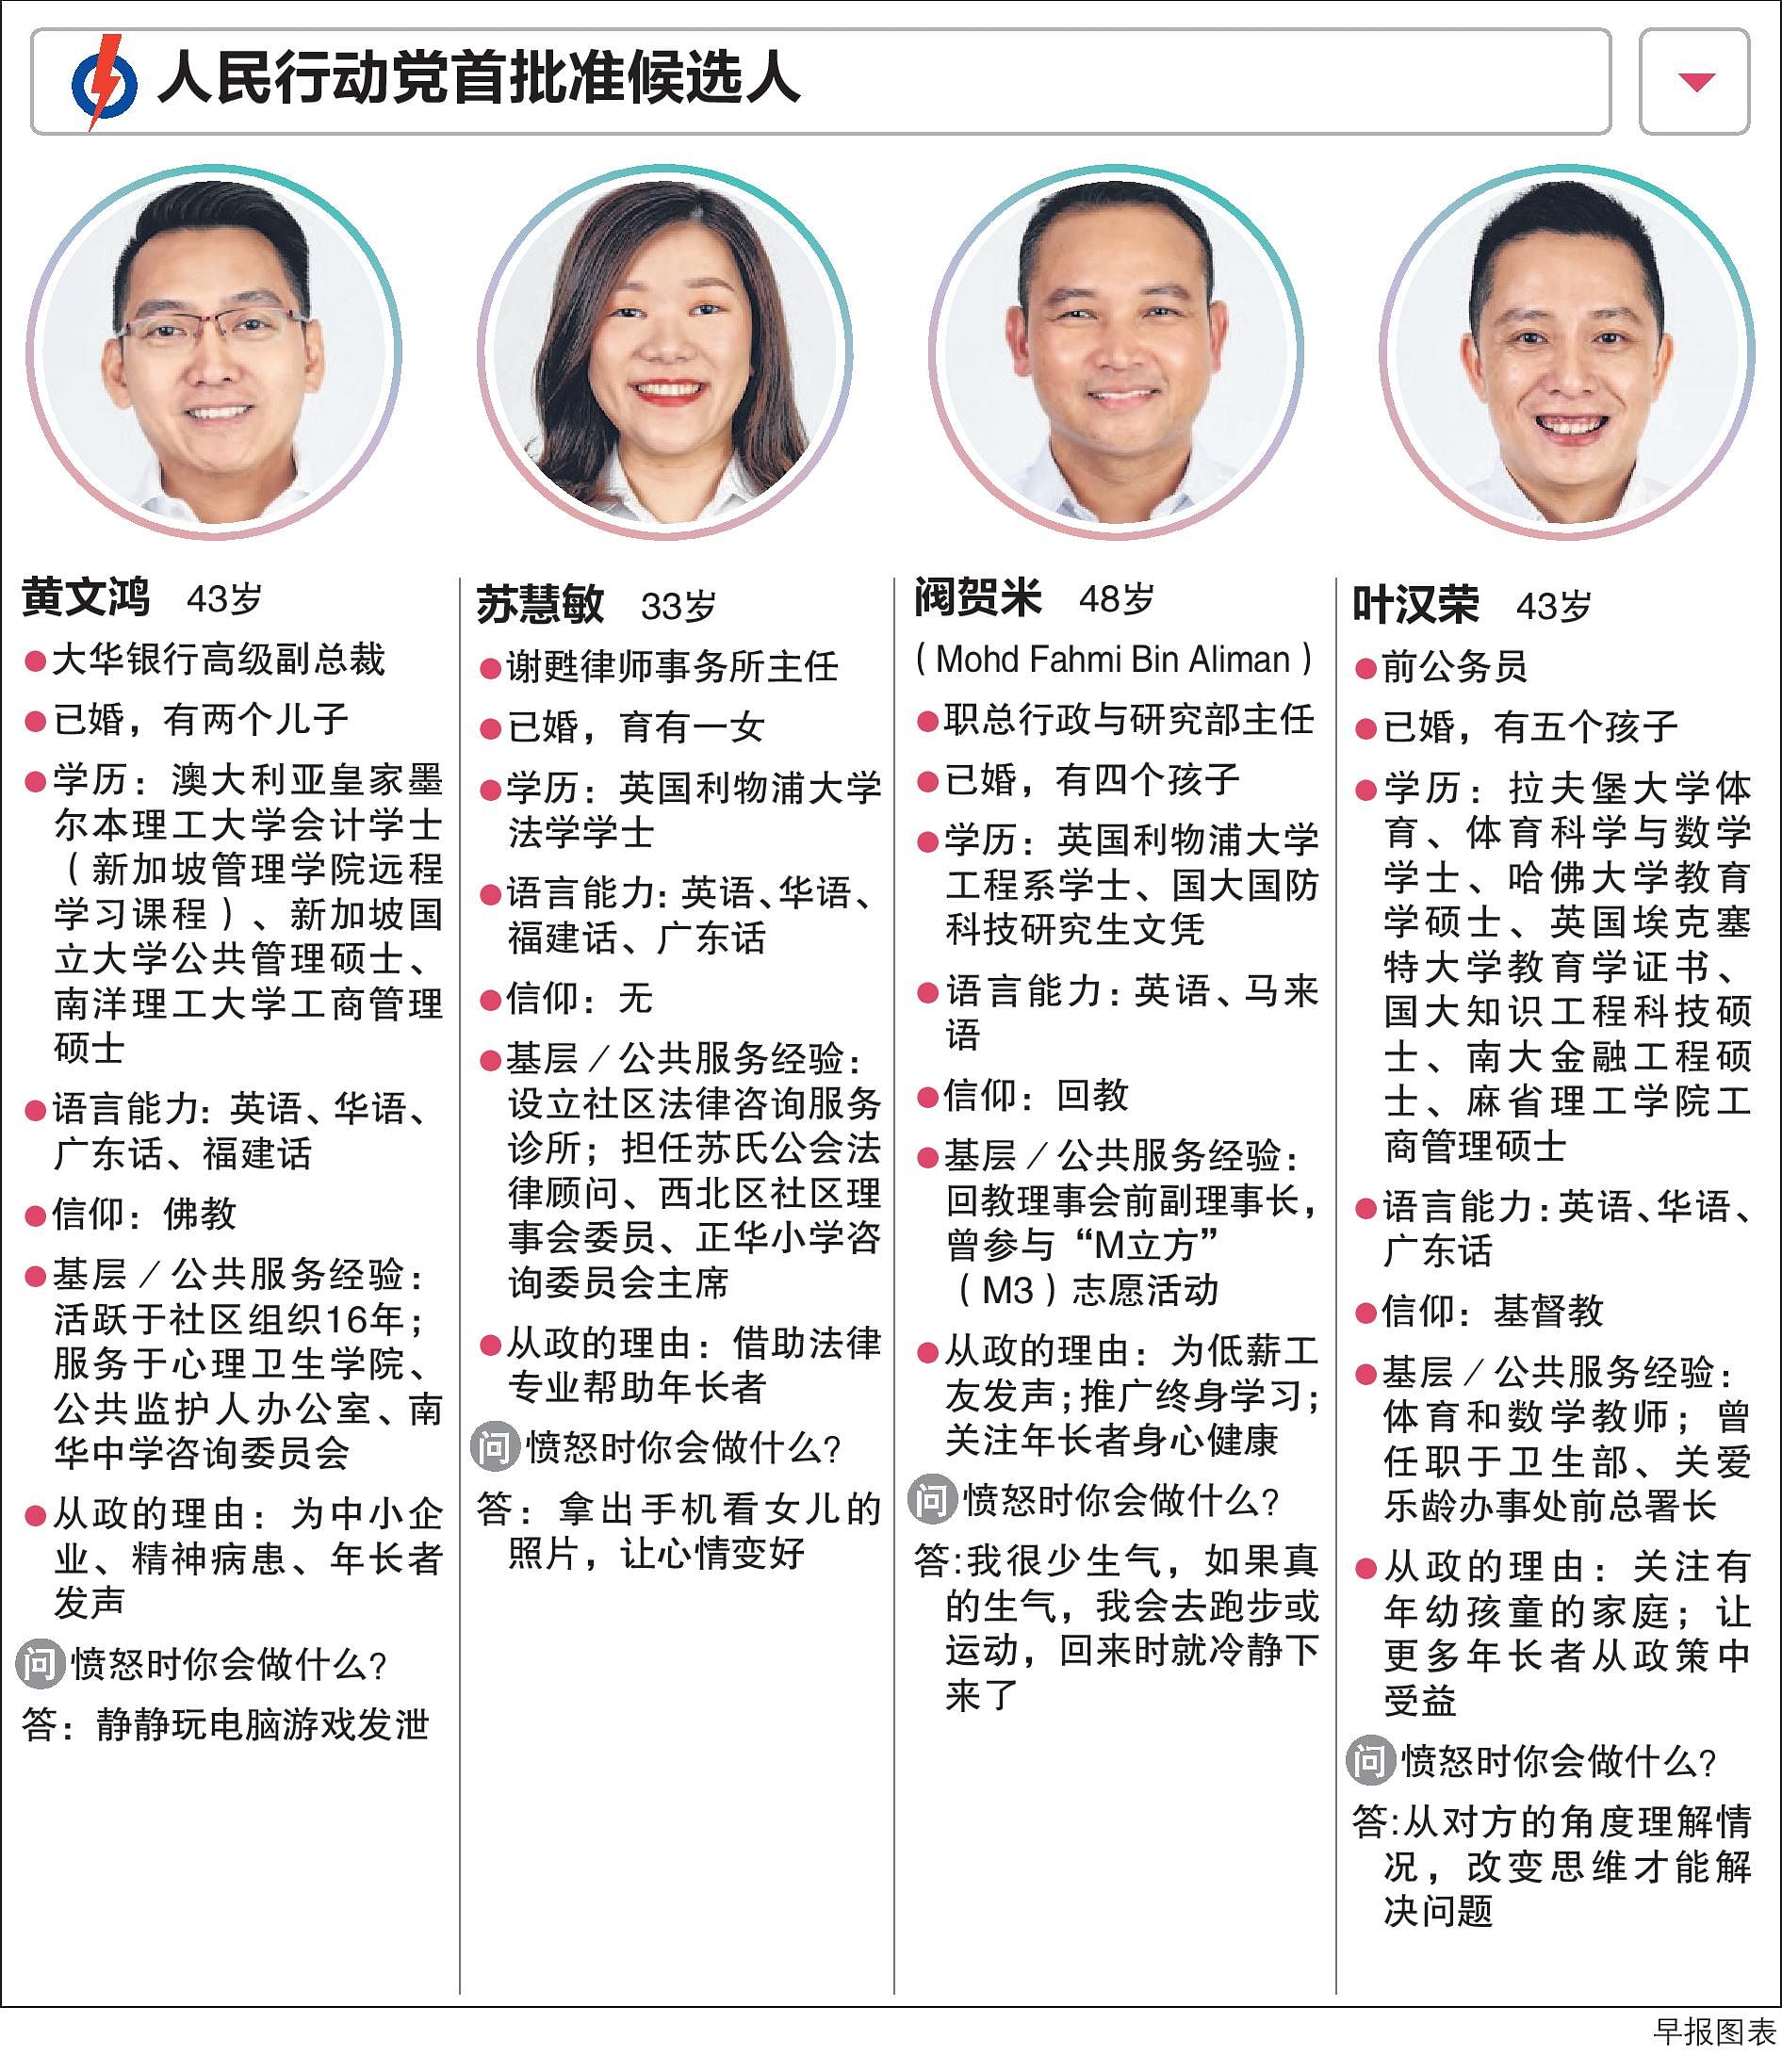 20200625_news_pap_candidates4_2506_2-page-001.jpg